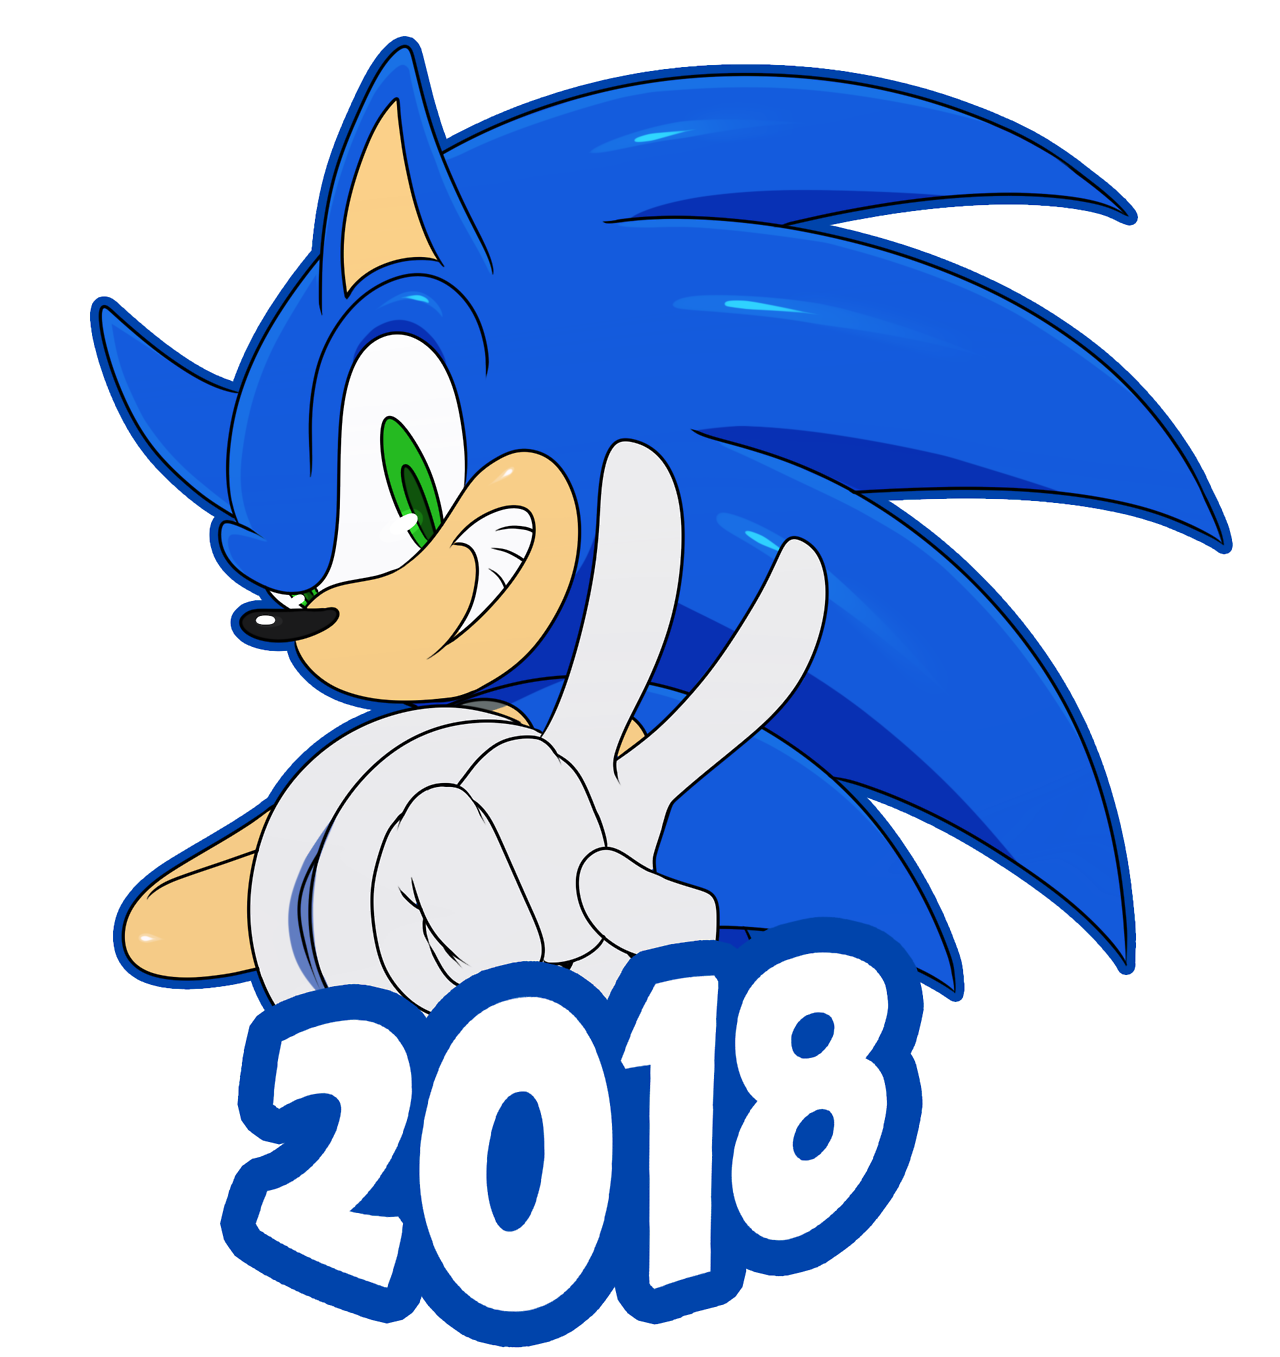 Sonic The Hedgehog Clipart & Look At Clip Art Images - ClipartLook